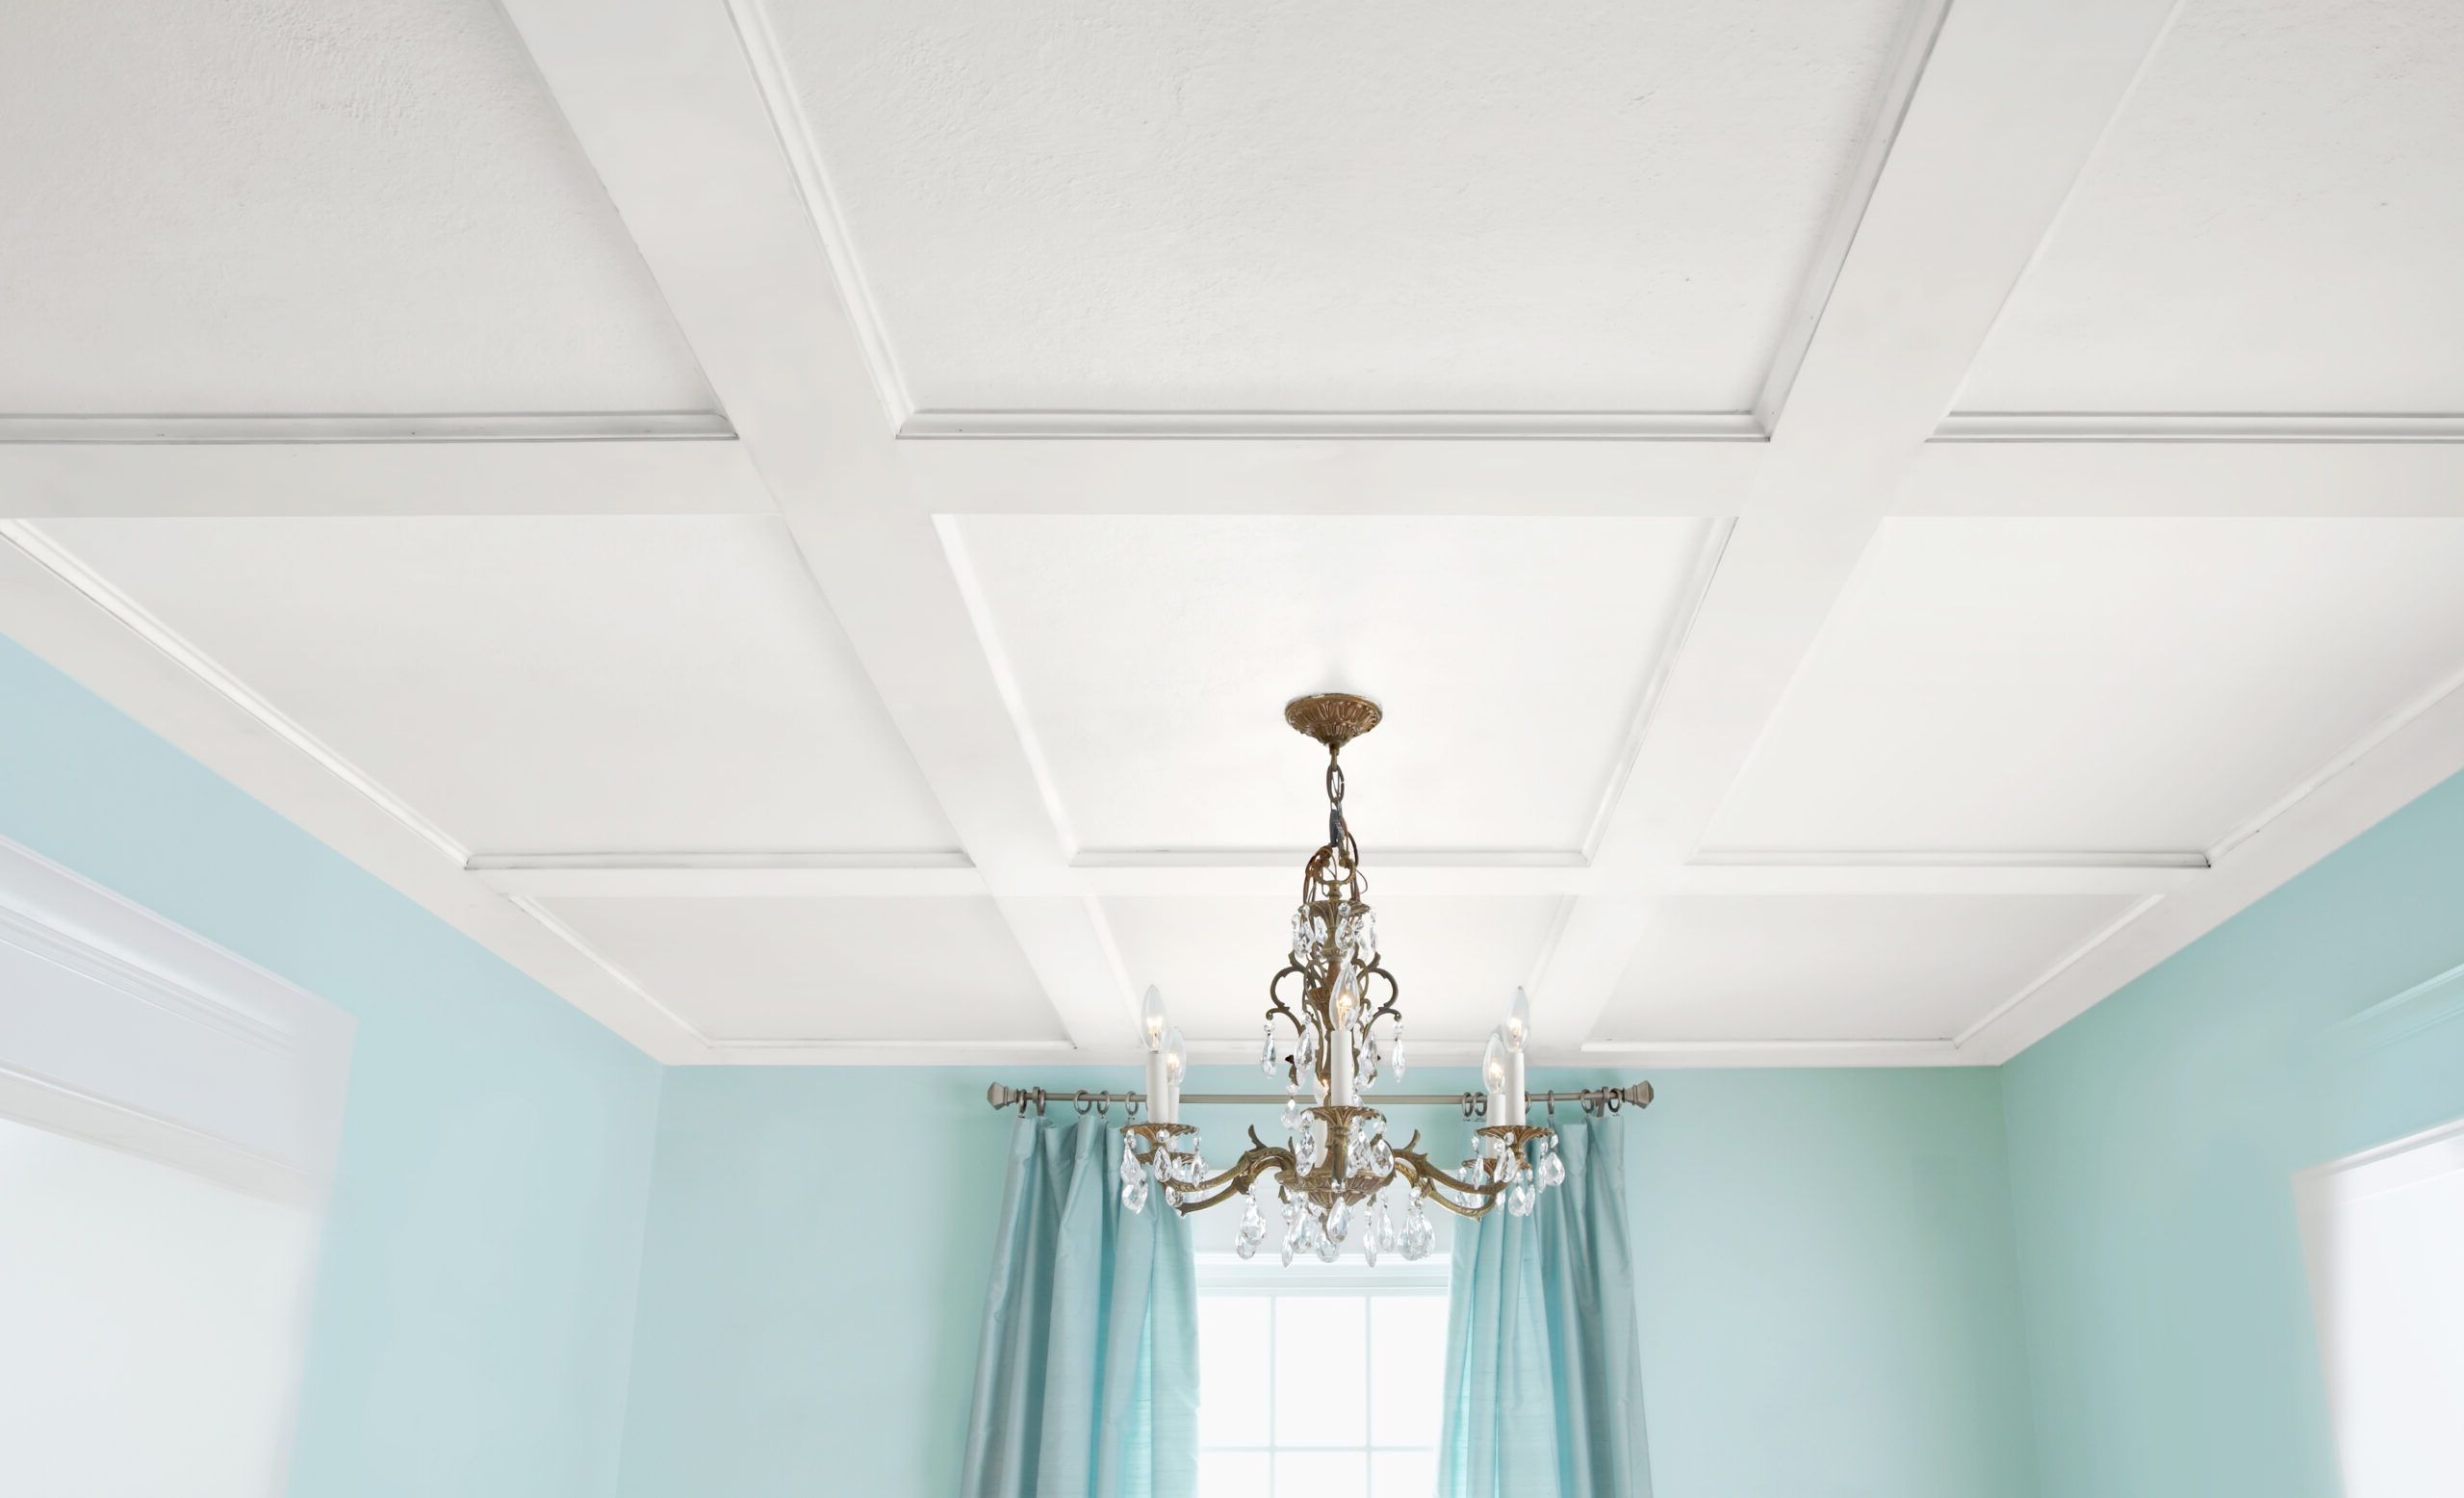 DIY Coffer Ceiling: Step-by-Step Guide To Creating A Stunning Coffered Ceiling